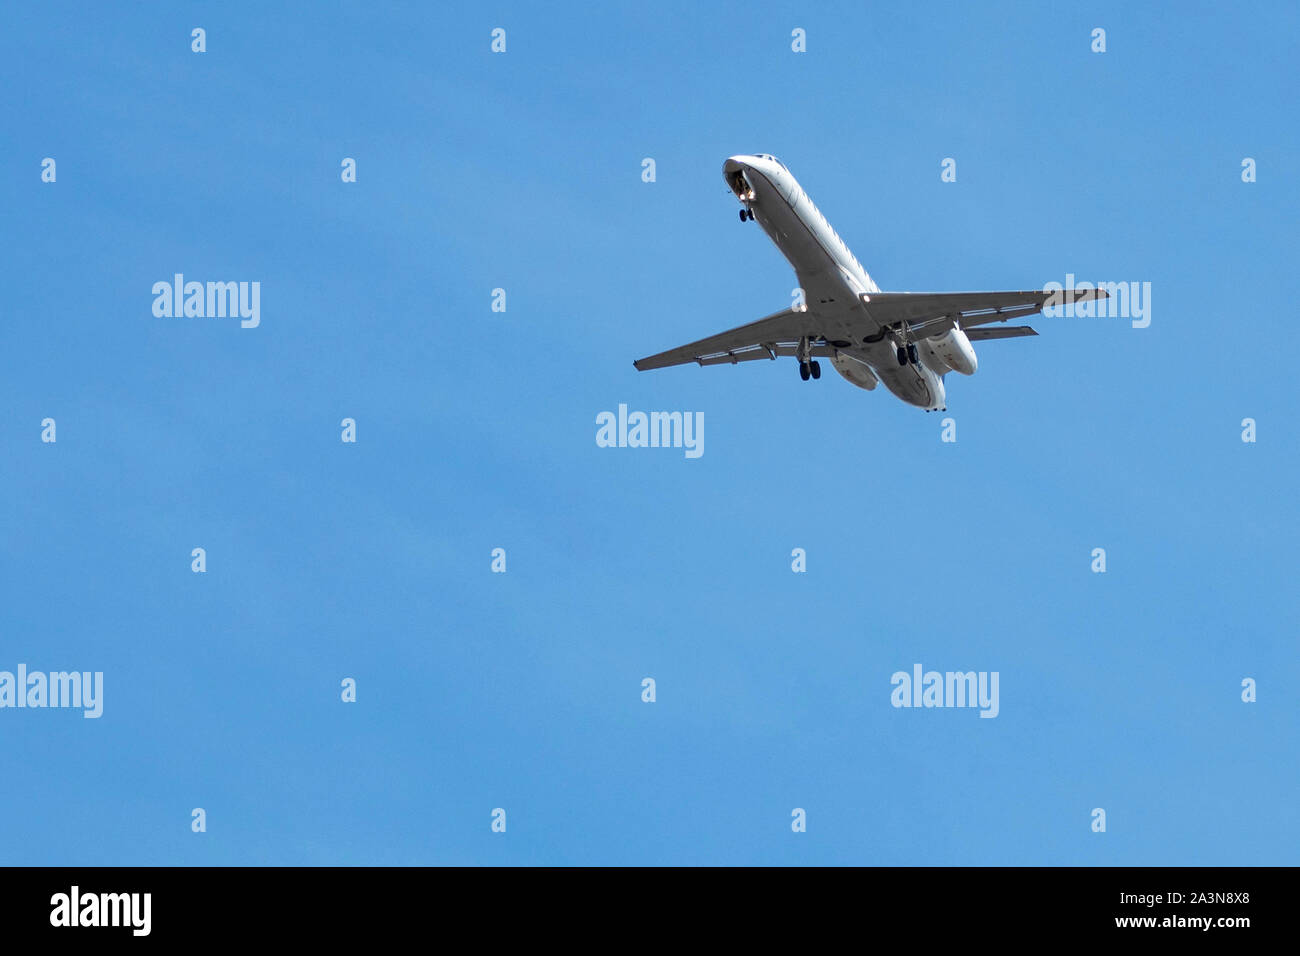 Underside view of Embraer ERJ-145 airplane with landing gear out as it approaches airport for landing Stock Photo